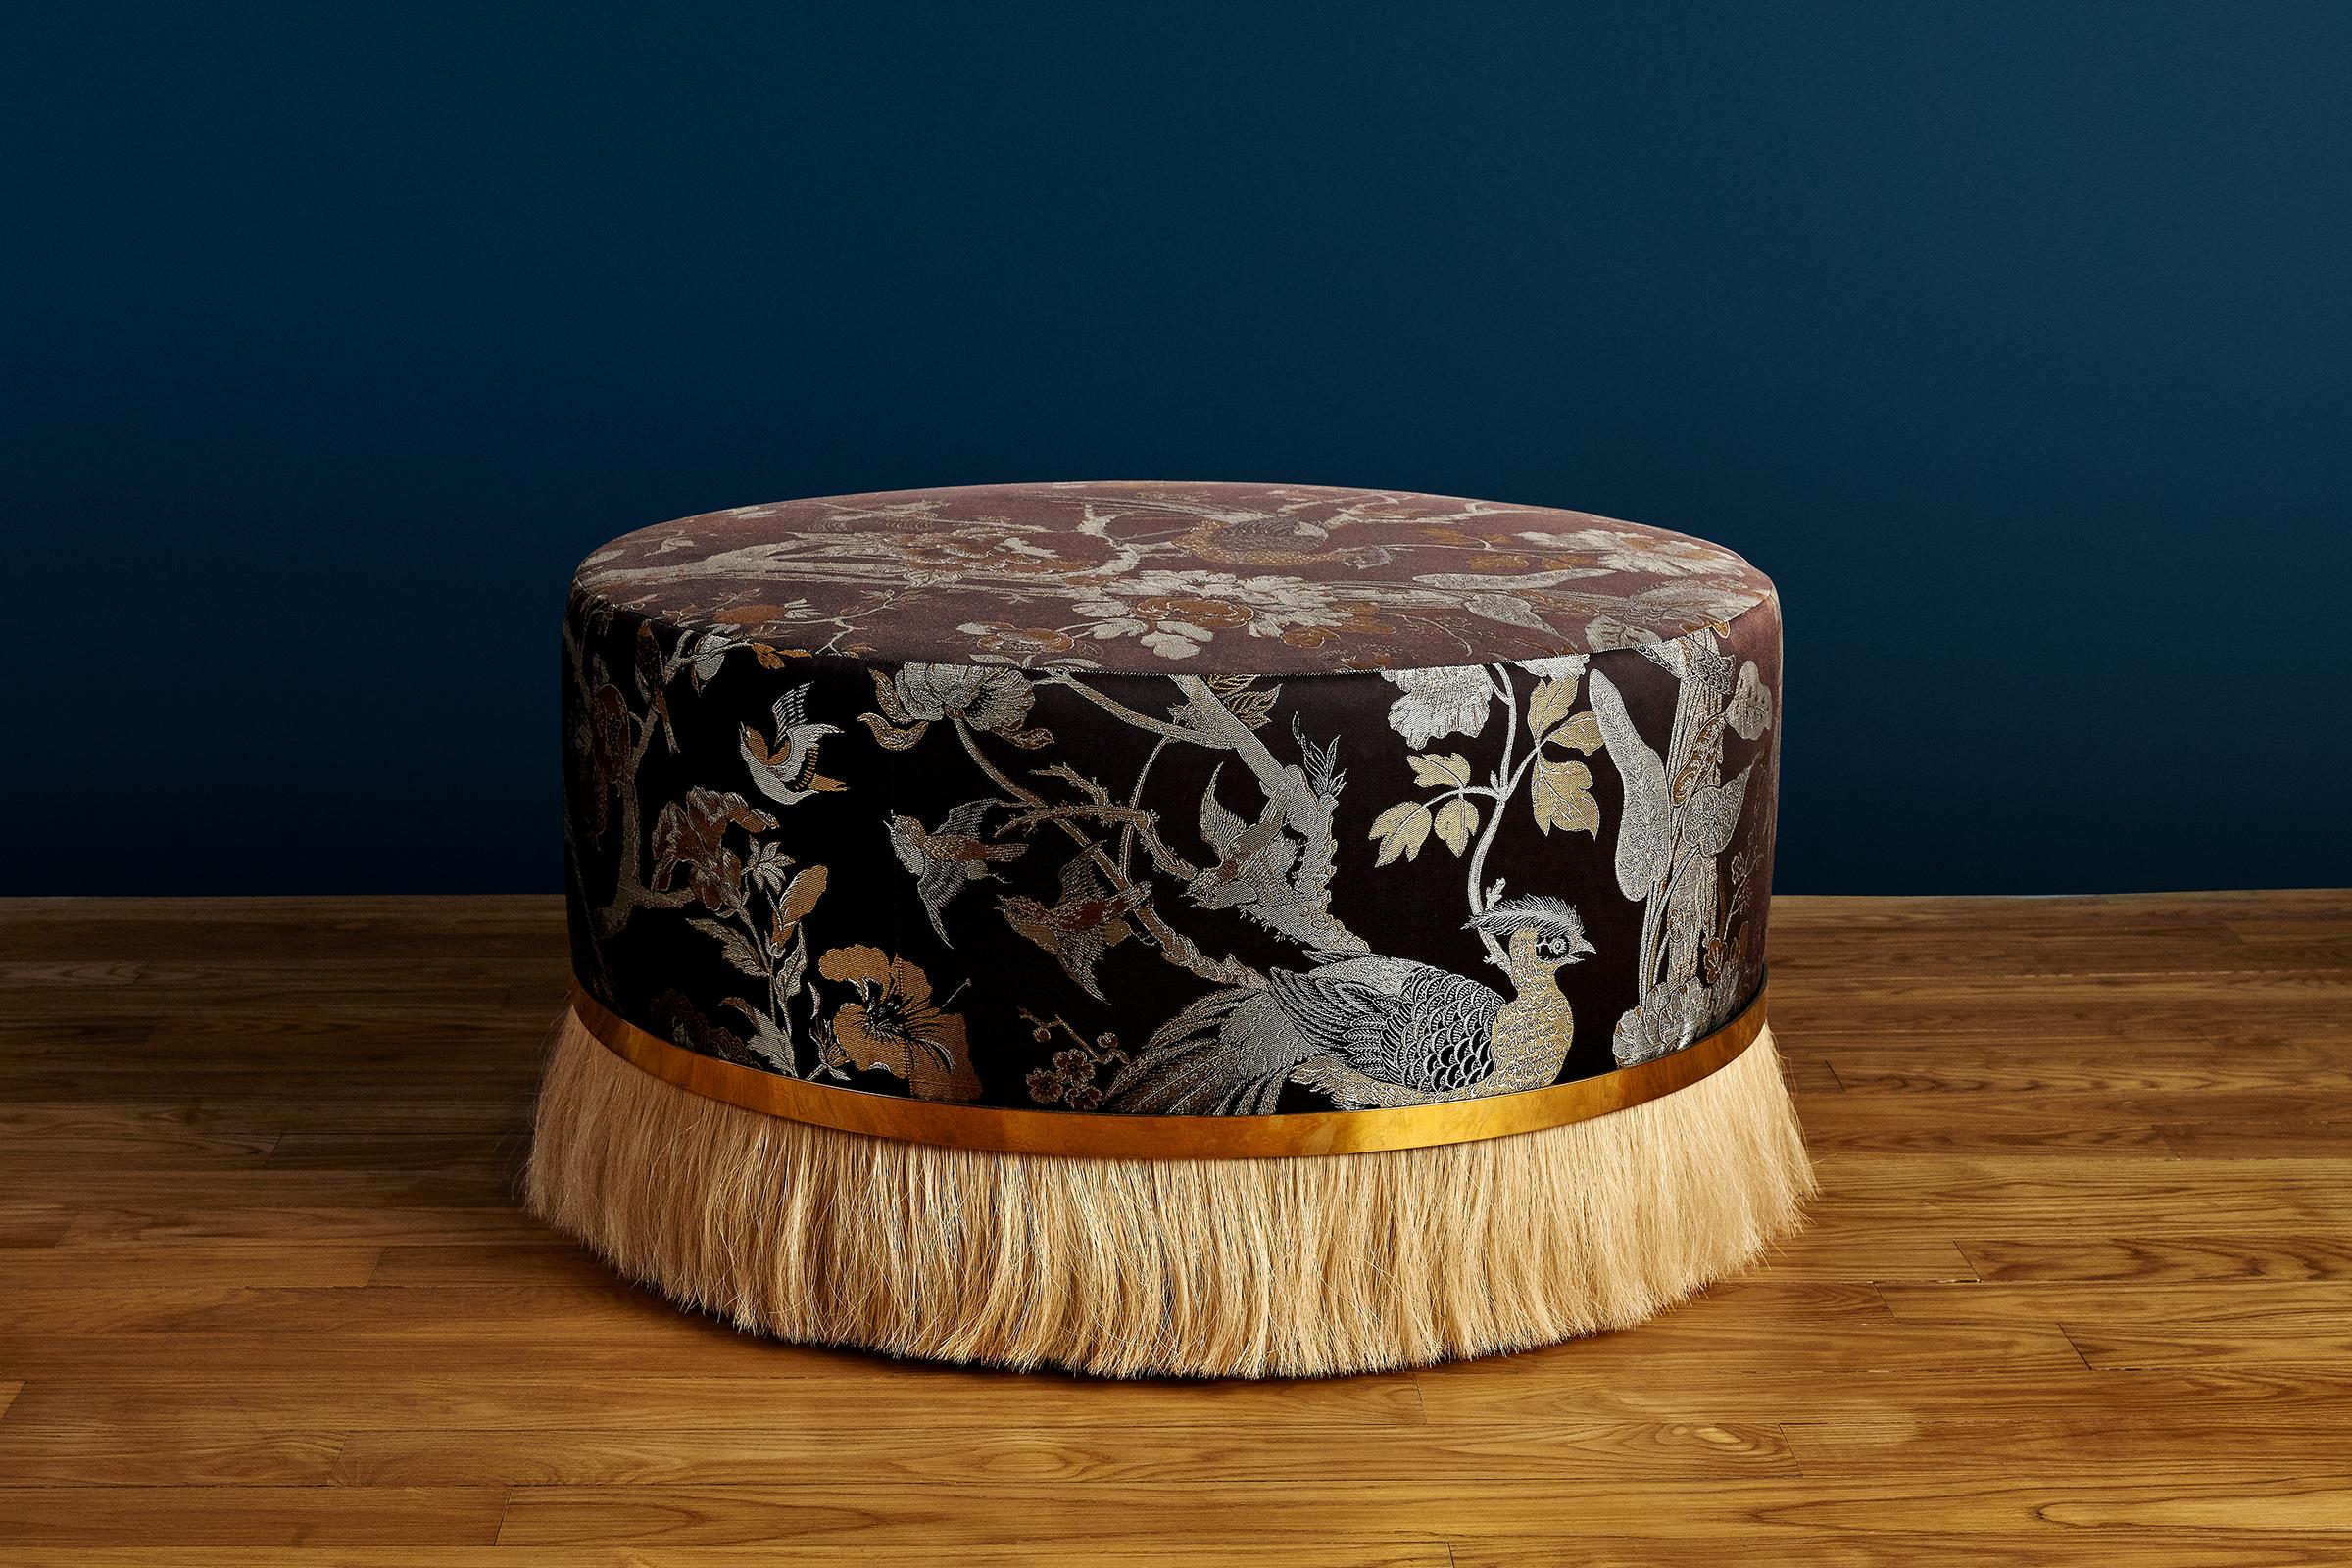 A larger version of our 'Thing Stool', the 'Thing Ottoman' features a luxuriously upholstered top, accented with the warmth of brass and the coarseness of horse hair.

This listing is for an in stock Thing Ottoman as pictured, with polished brass,